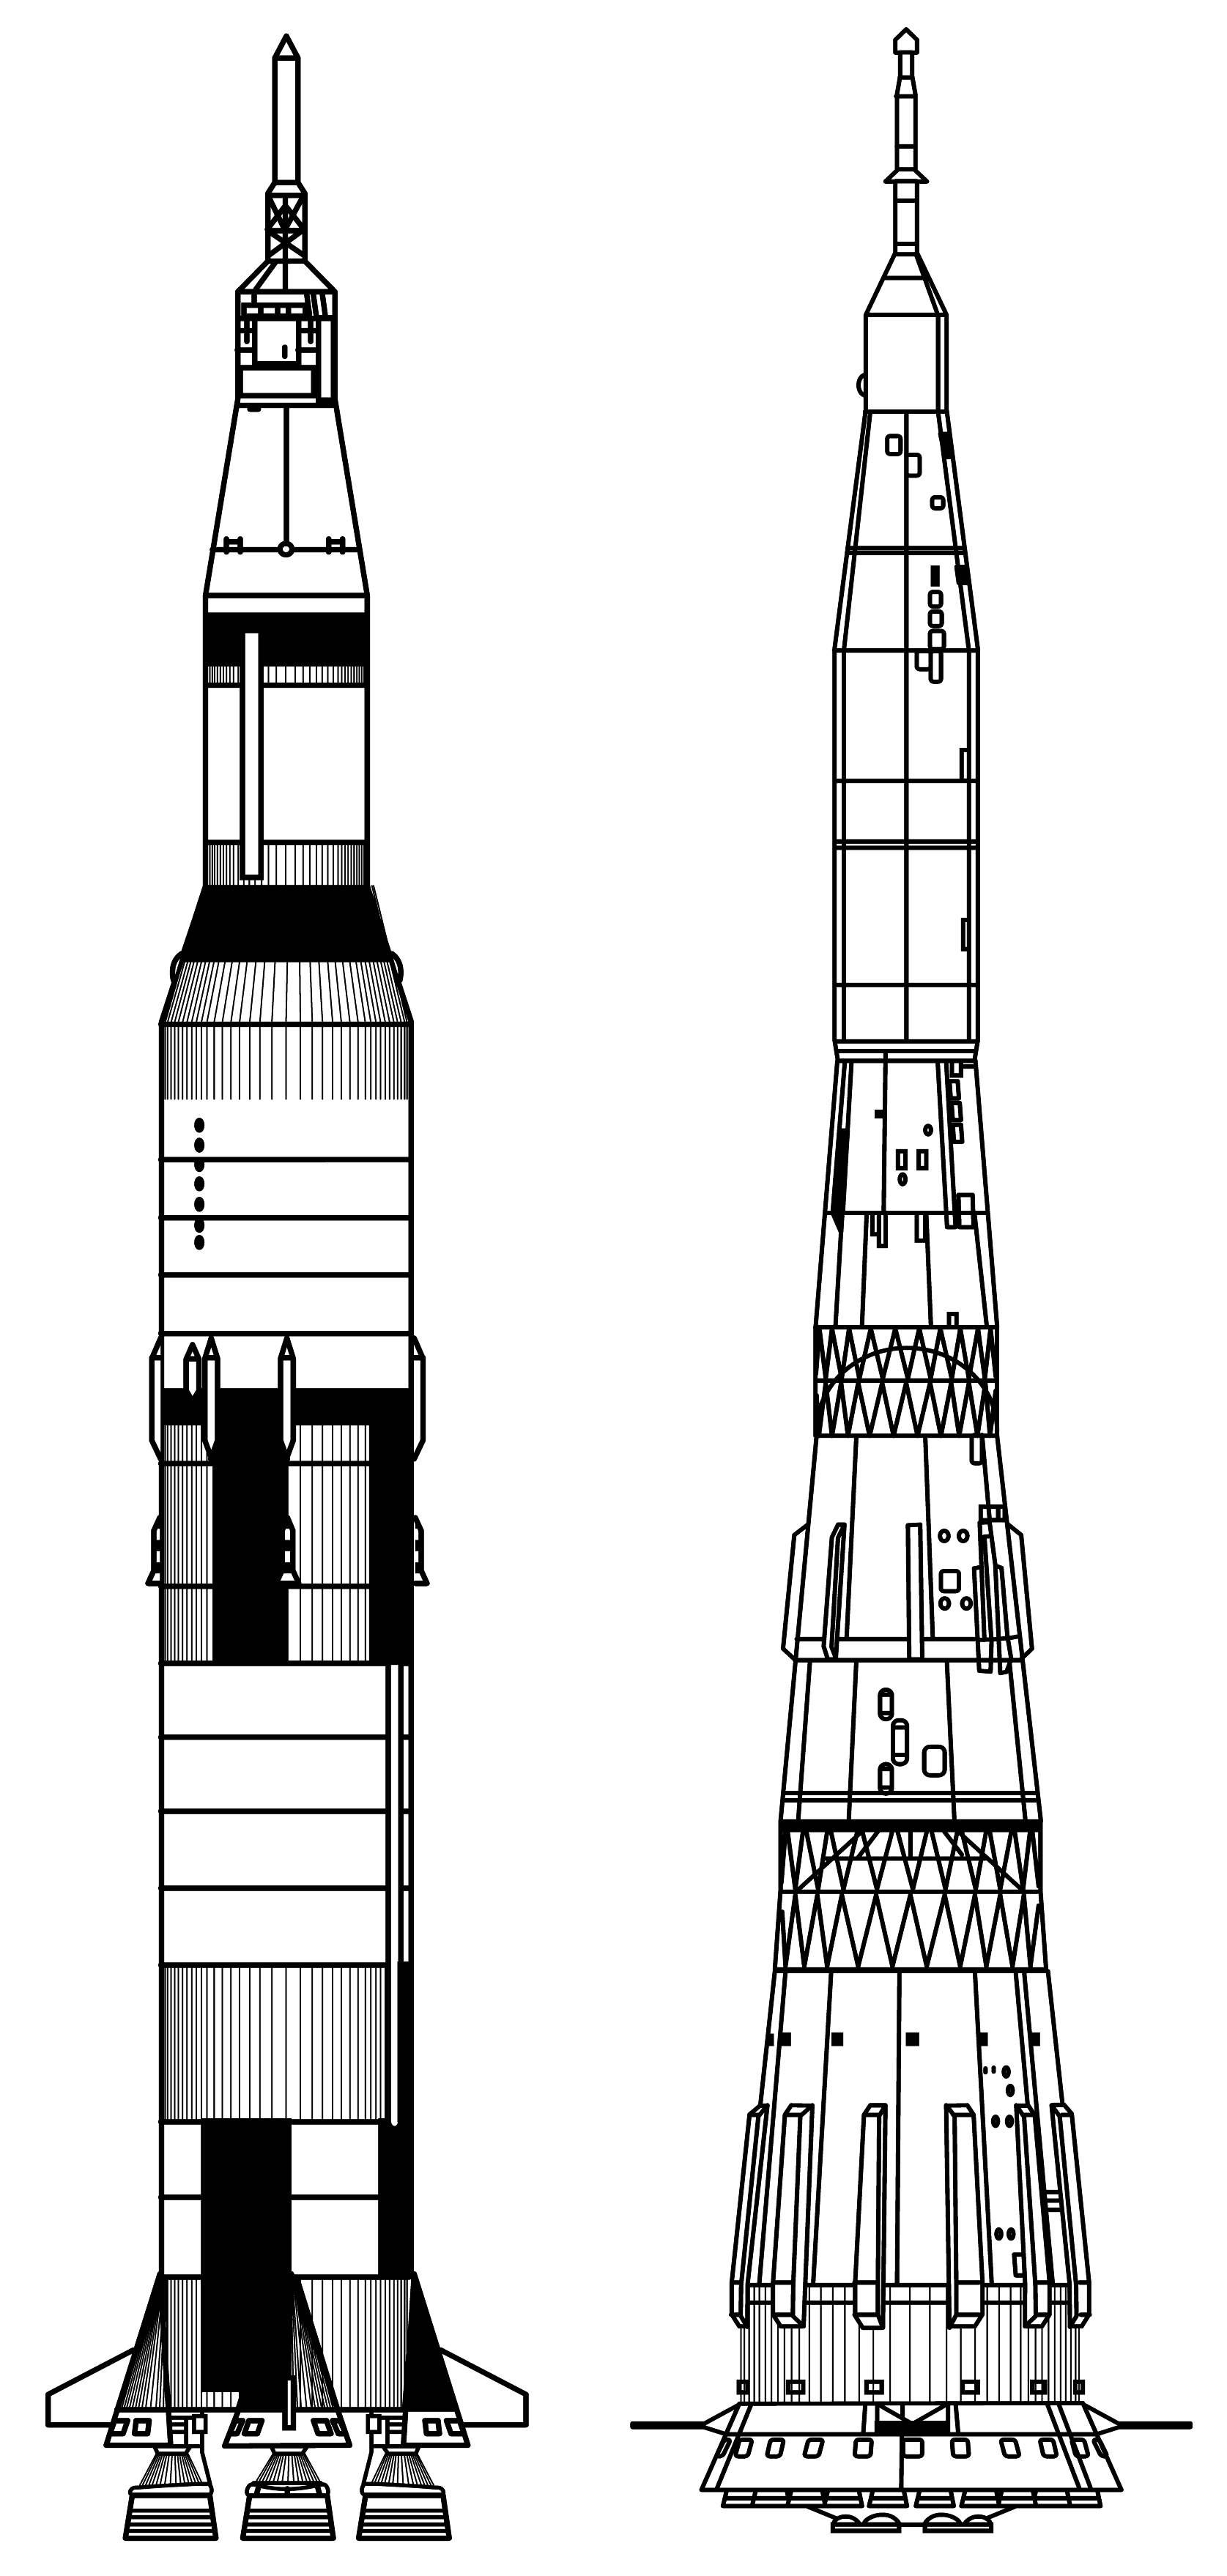 Saturn 5 Logo - File:Saturn V vs N1 - to scale drawing.png - Wikimedia Commons